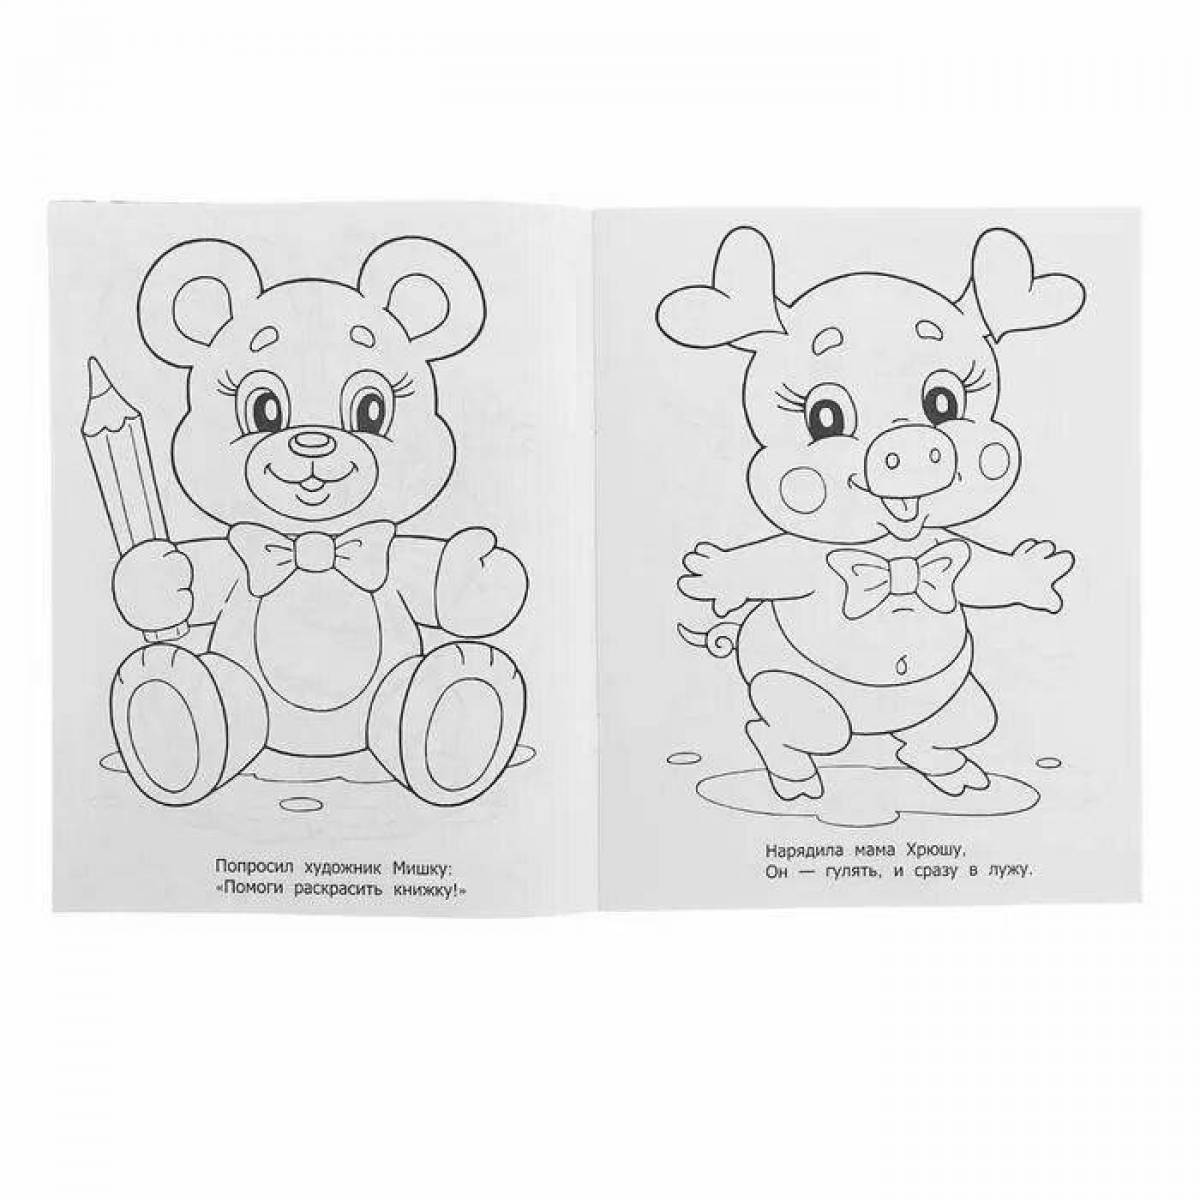 Funny pink elephant coloring book